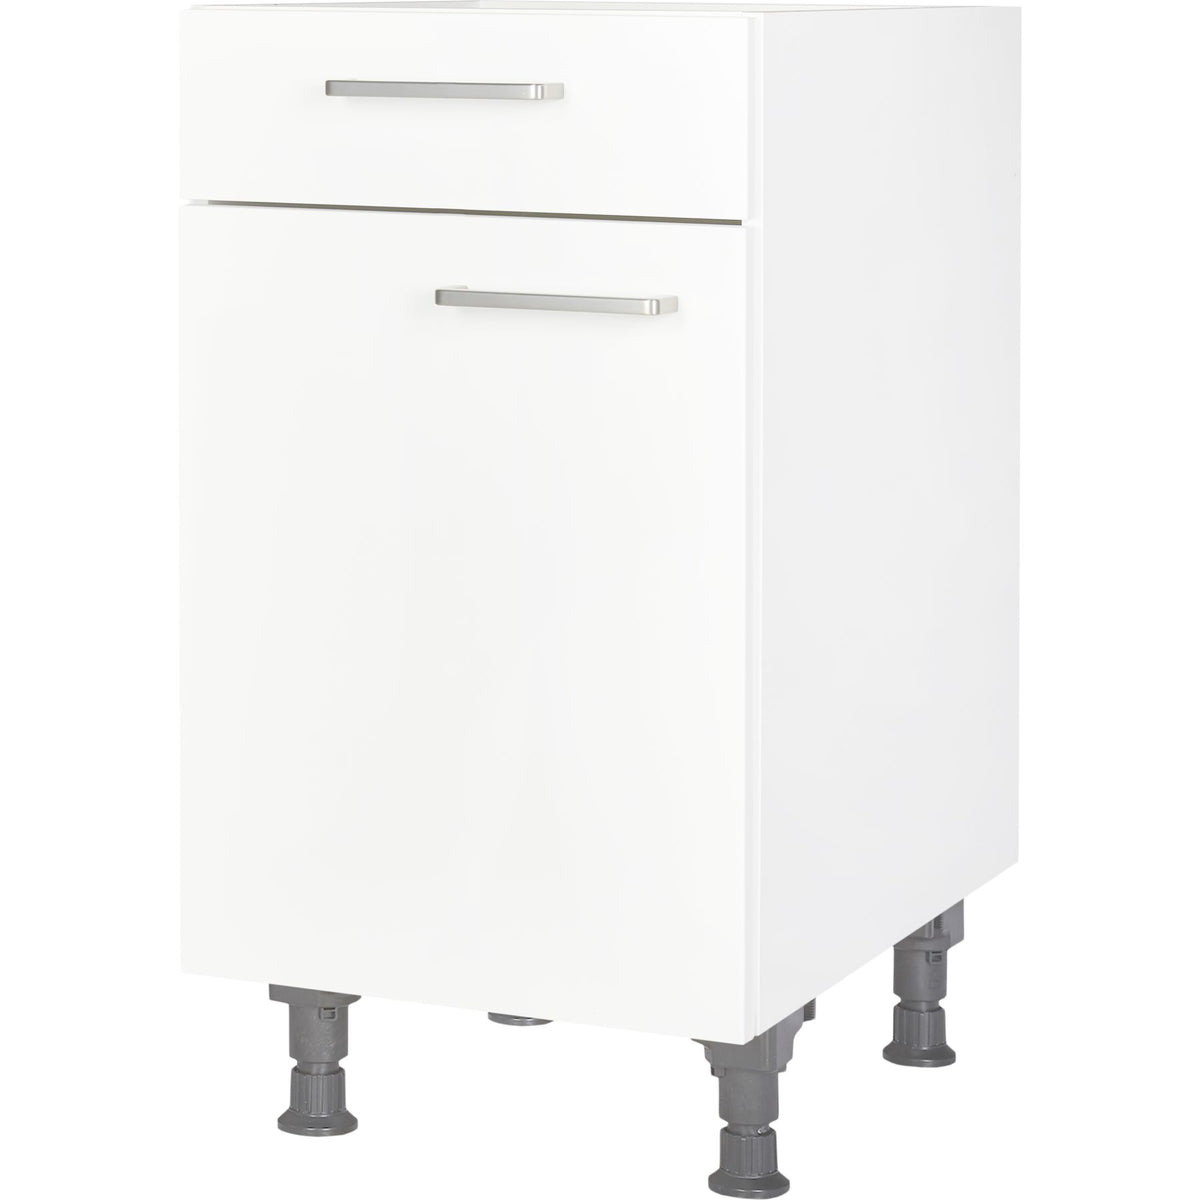 base drawer kitchen 60cm US and cabinet with 30cm white d nobilia 45cm